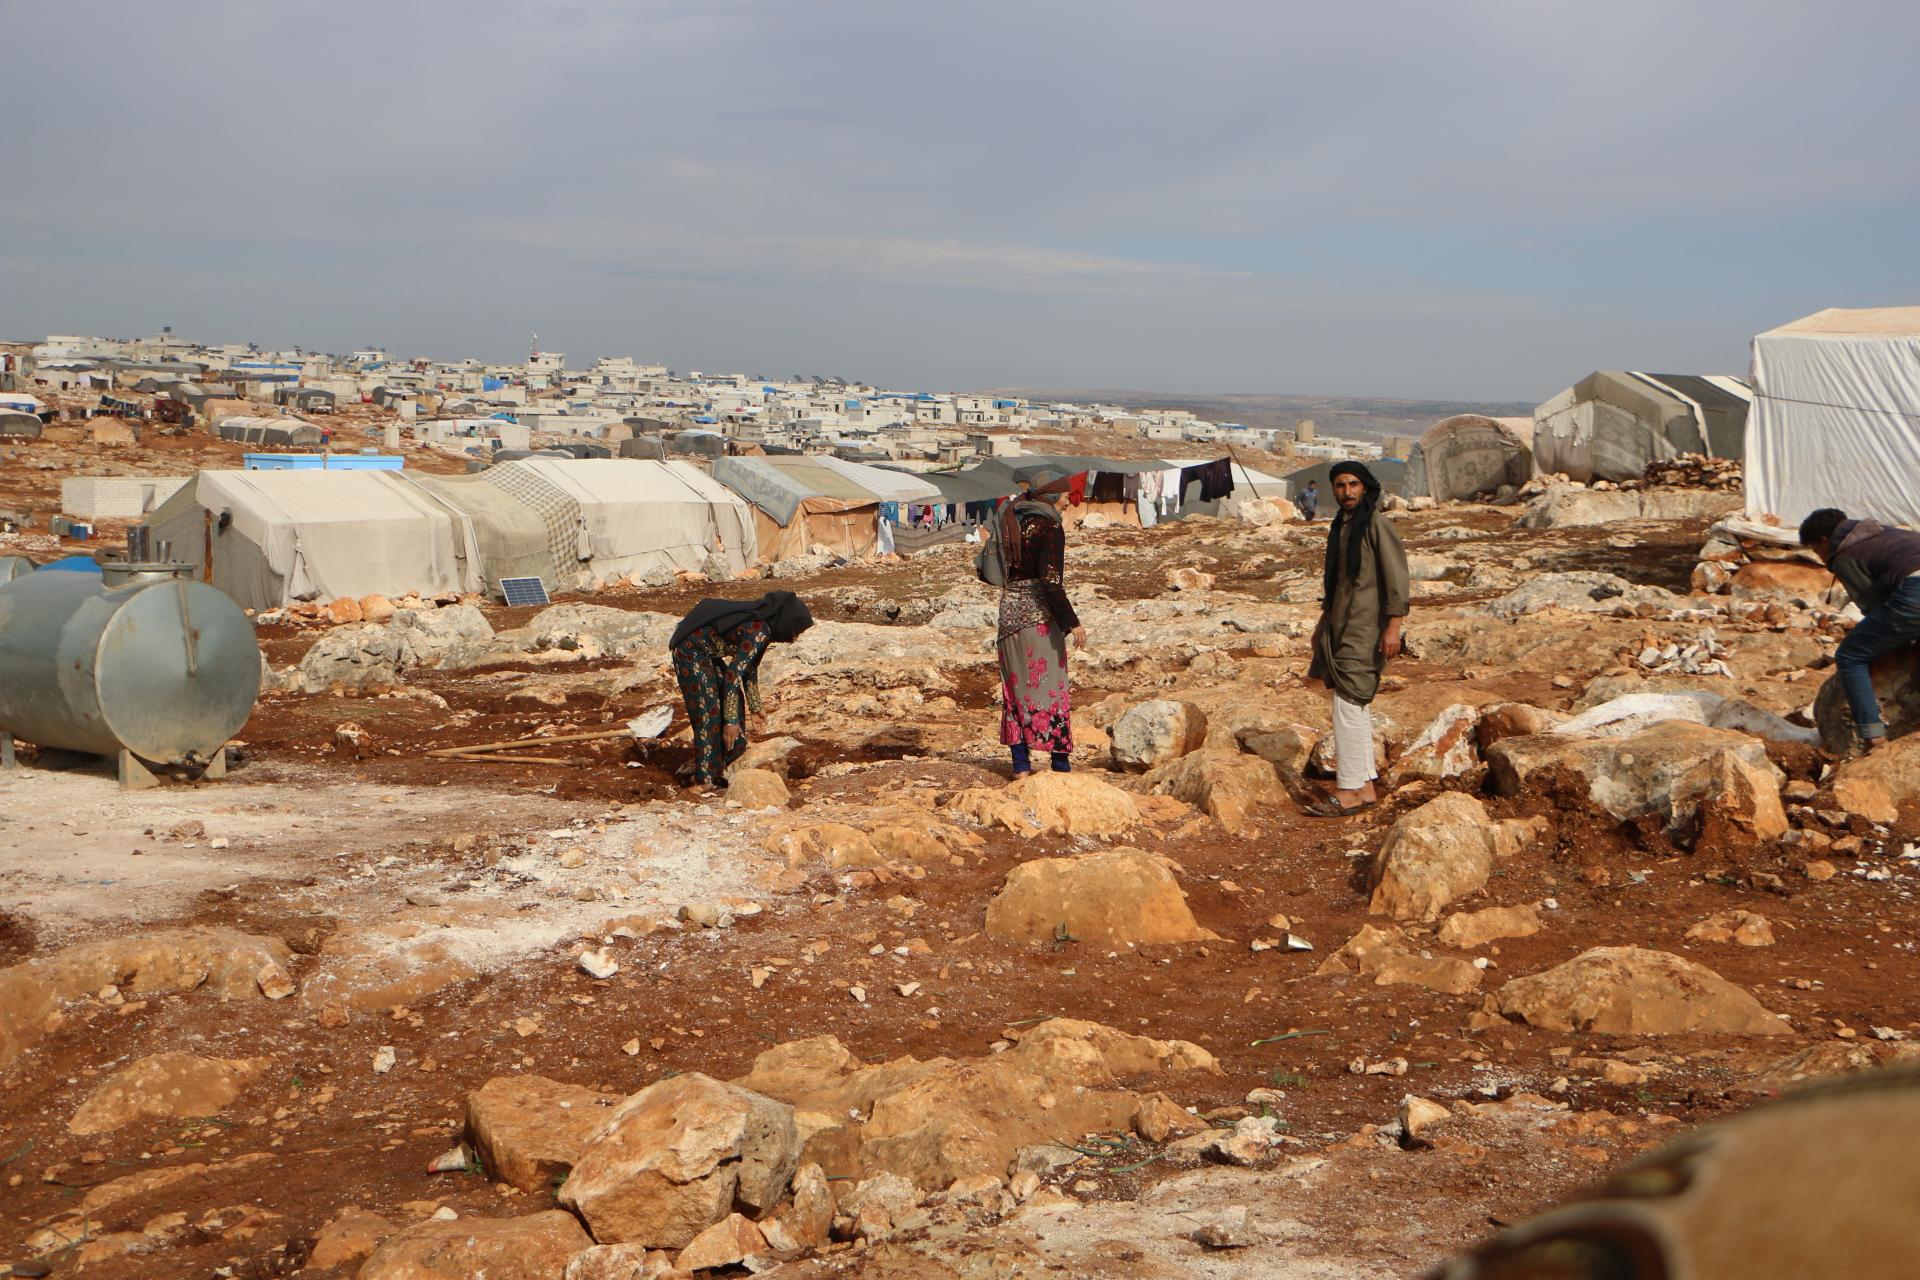 An image of displaced people in Northwest Syria who are already living in harsh conditions